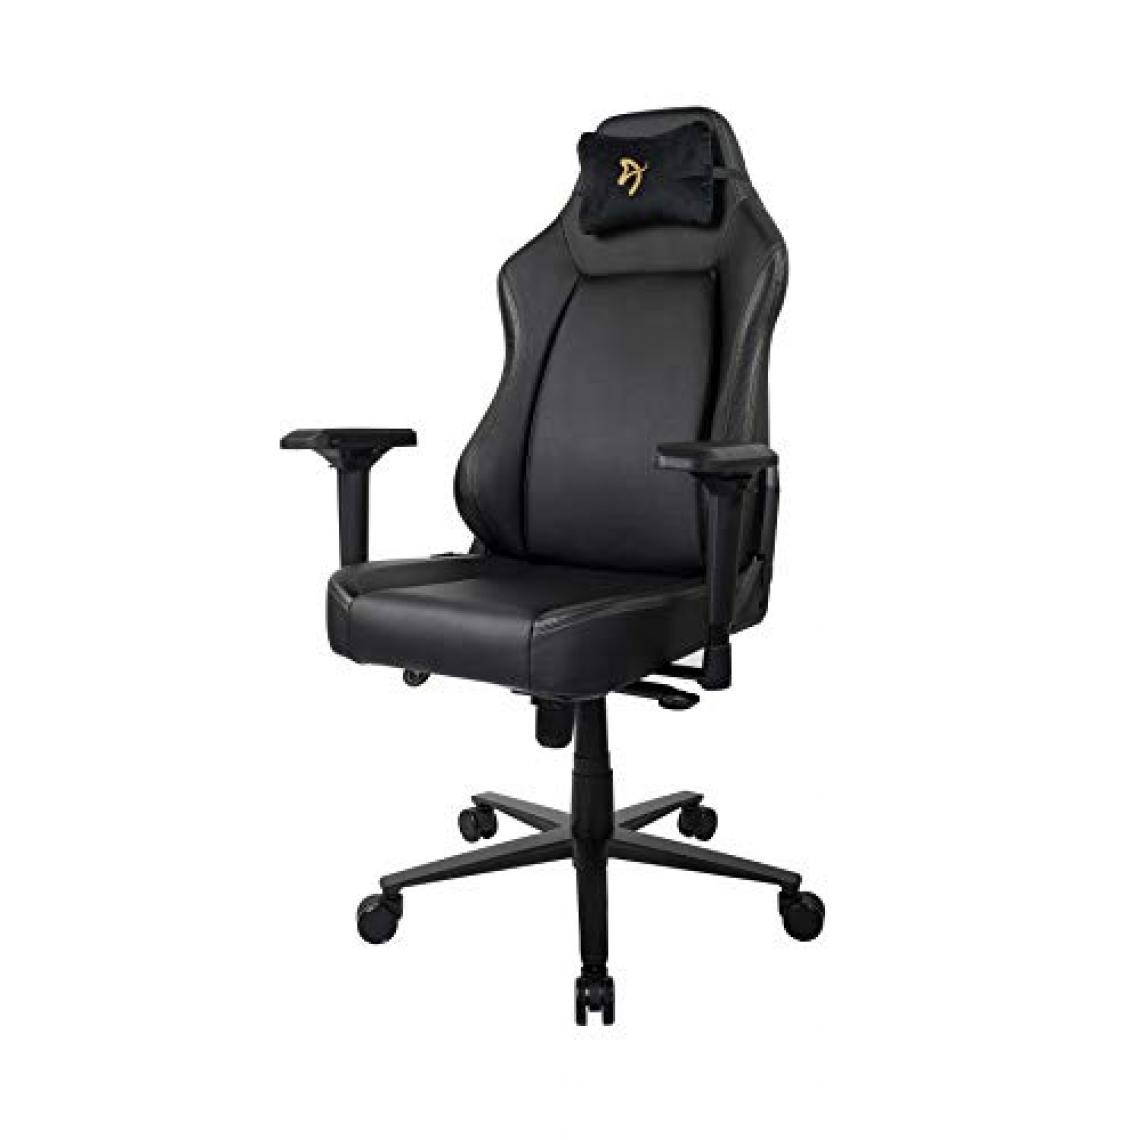 Arozzi - Fauteuil Primo PU (Noir/Or) - Chaise gamer